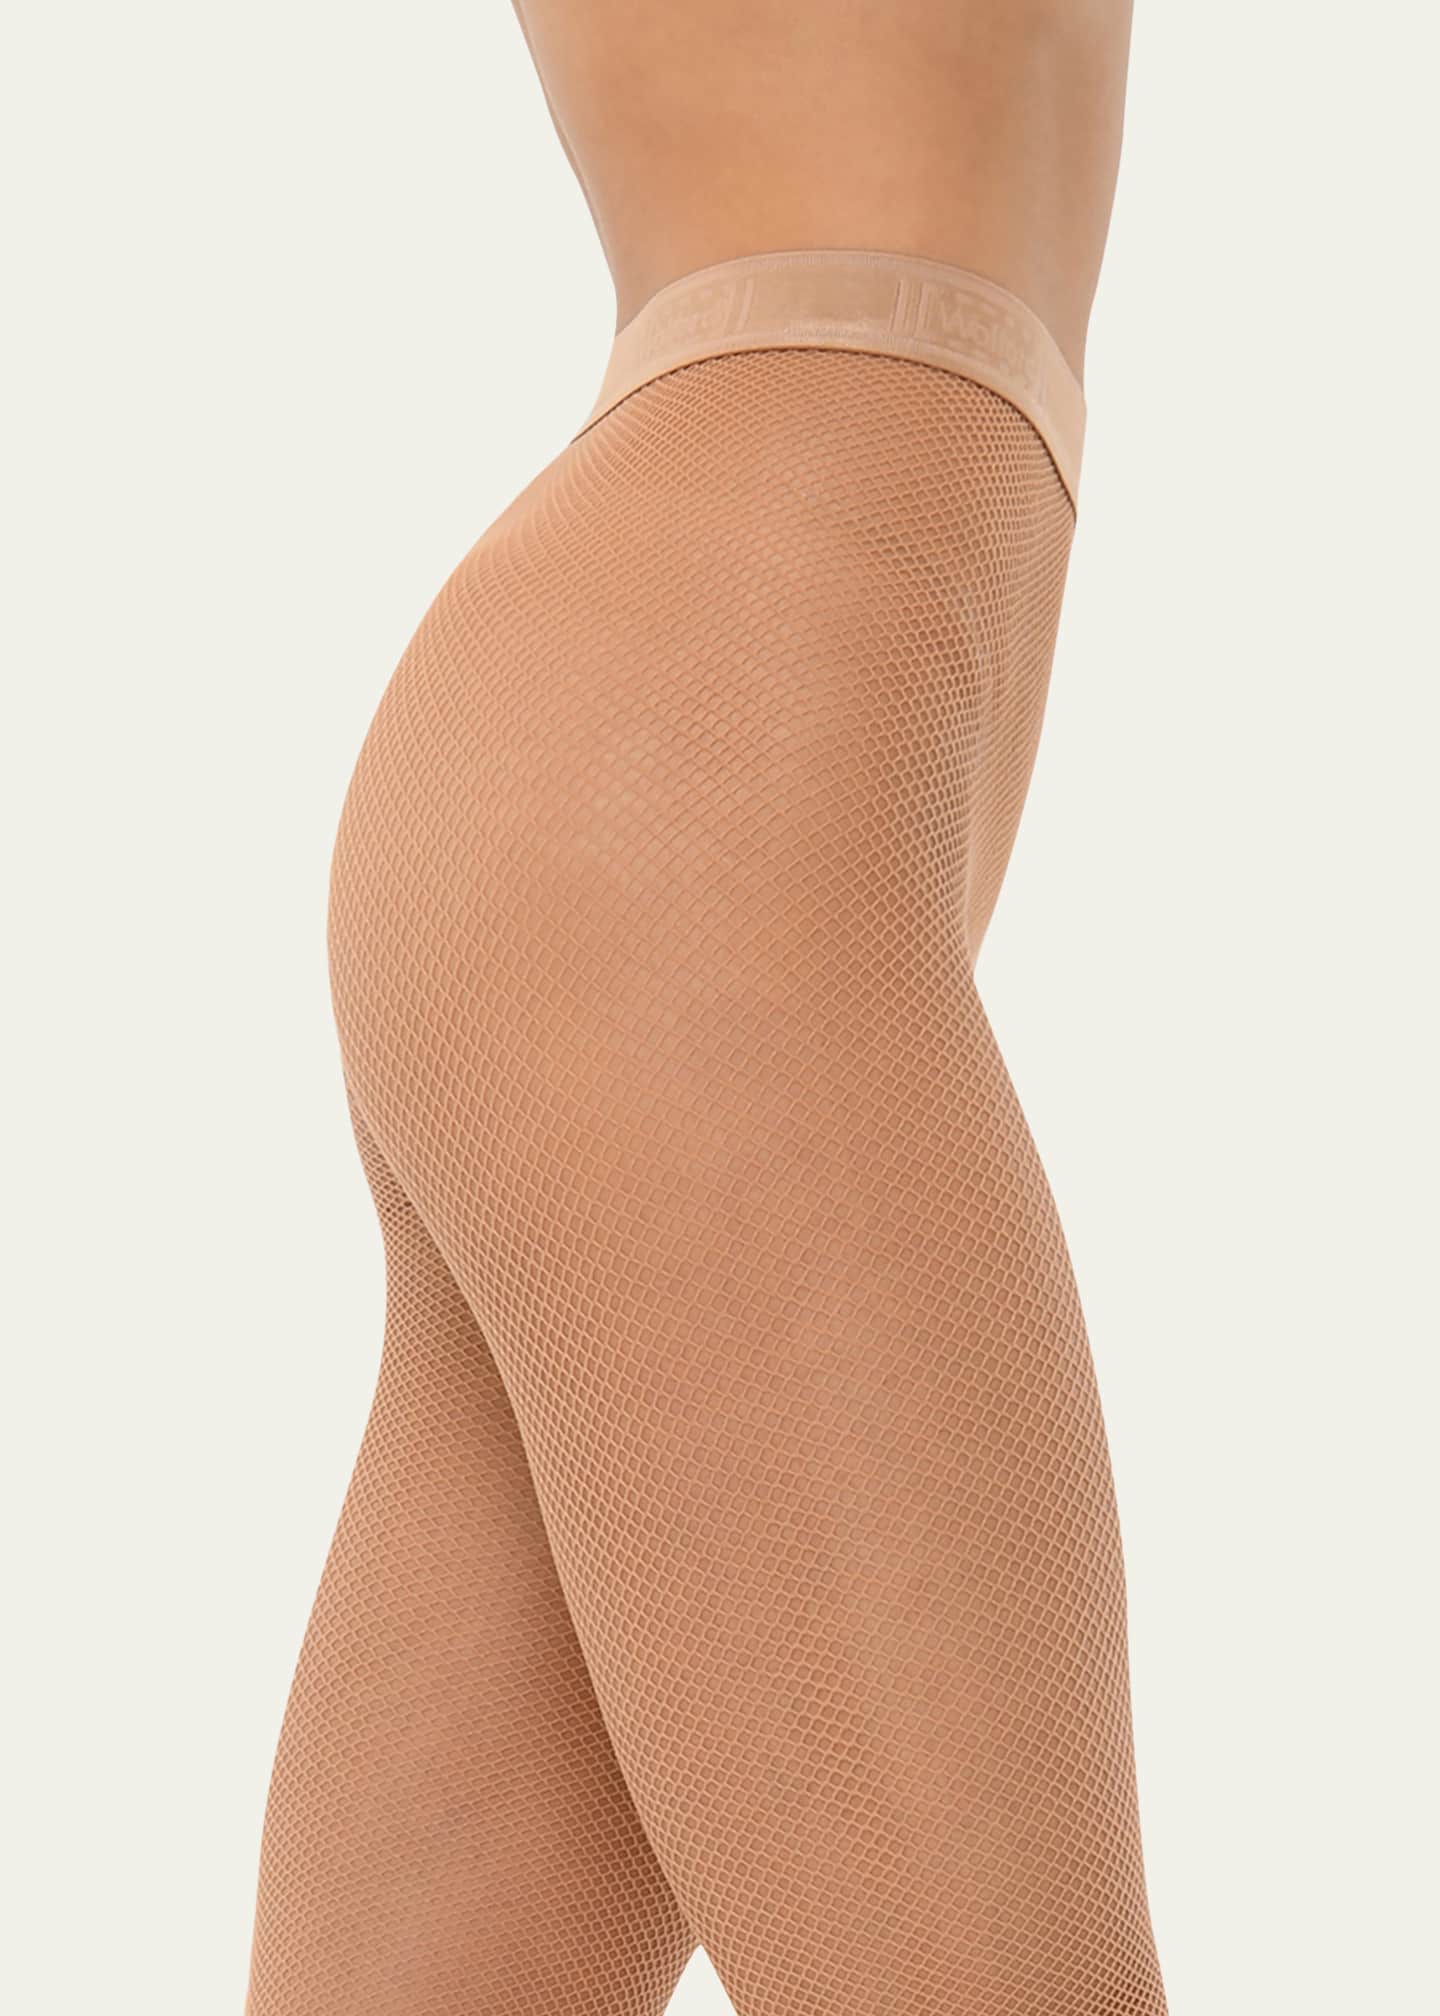 Wolford's Swarovski-Studded Holiday Tights Come With $1,200 Price Tag –  Rvce News